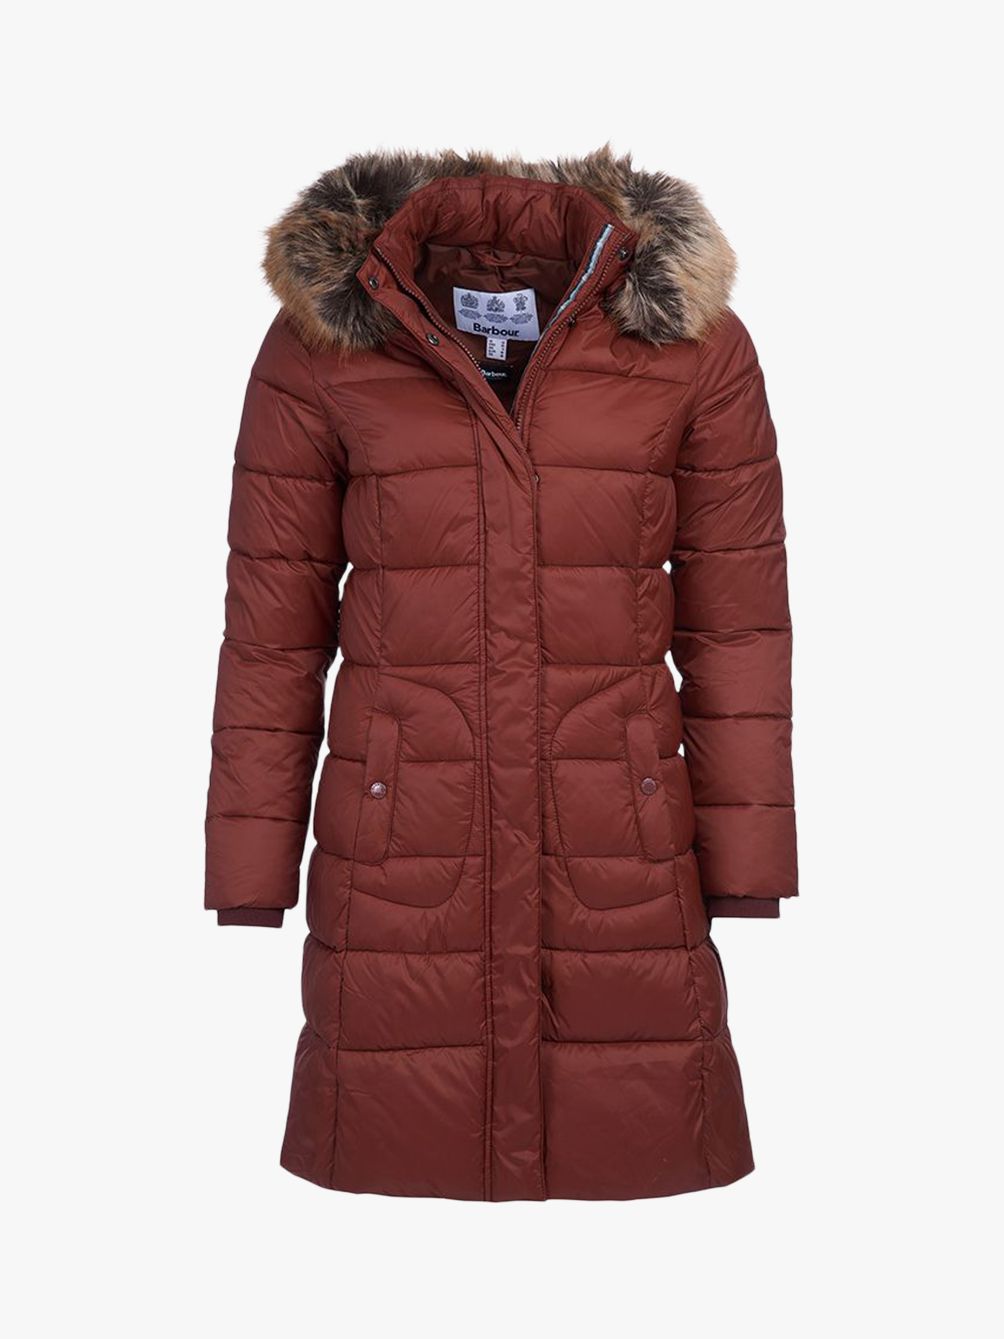 Barbour Bridled Quilted Longline Coat, Brown at John Lewis & Partners